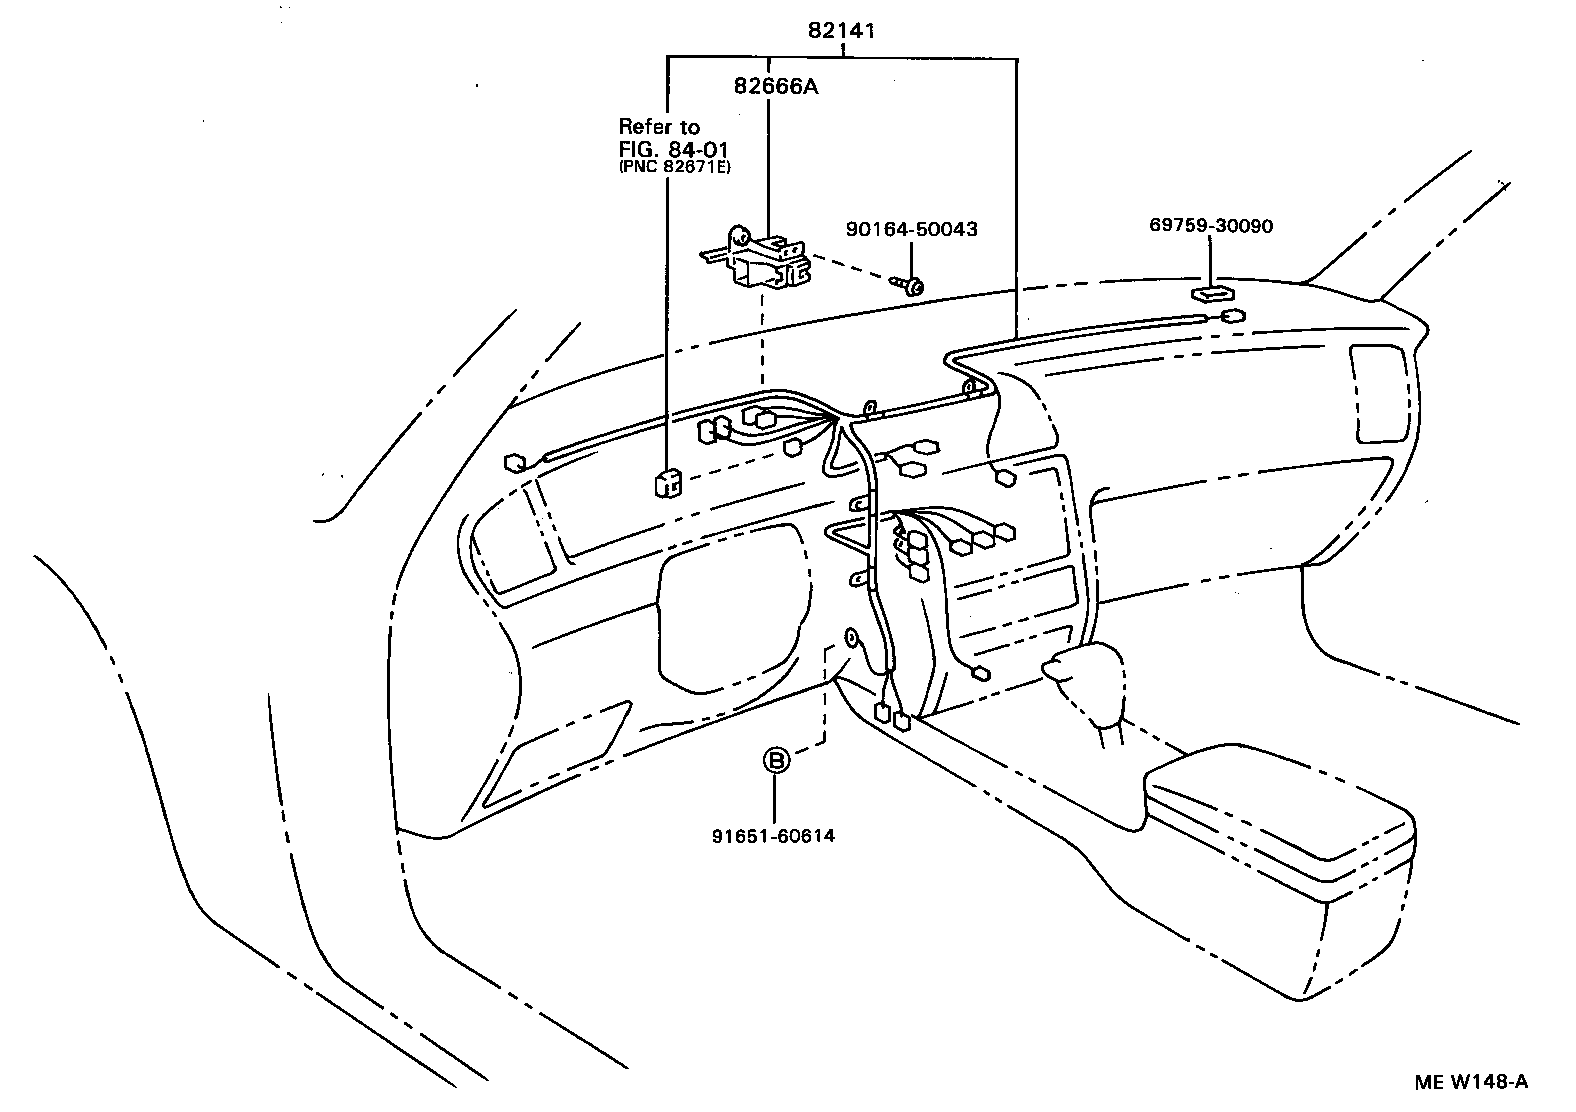  GS300 |  WIRING CLAMP